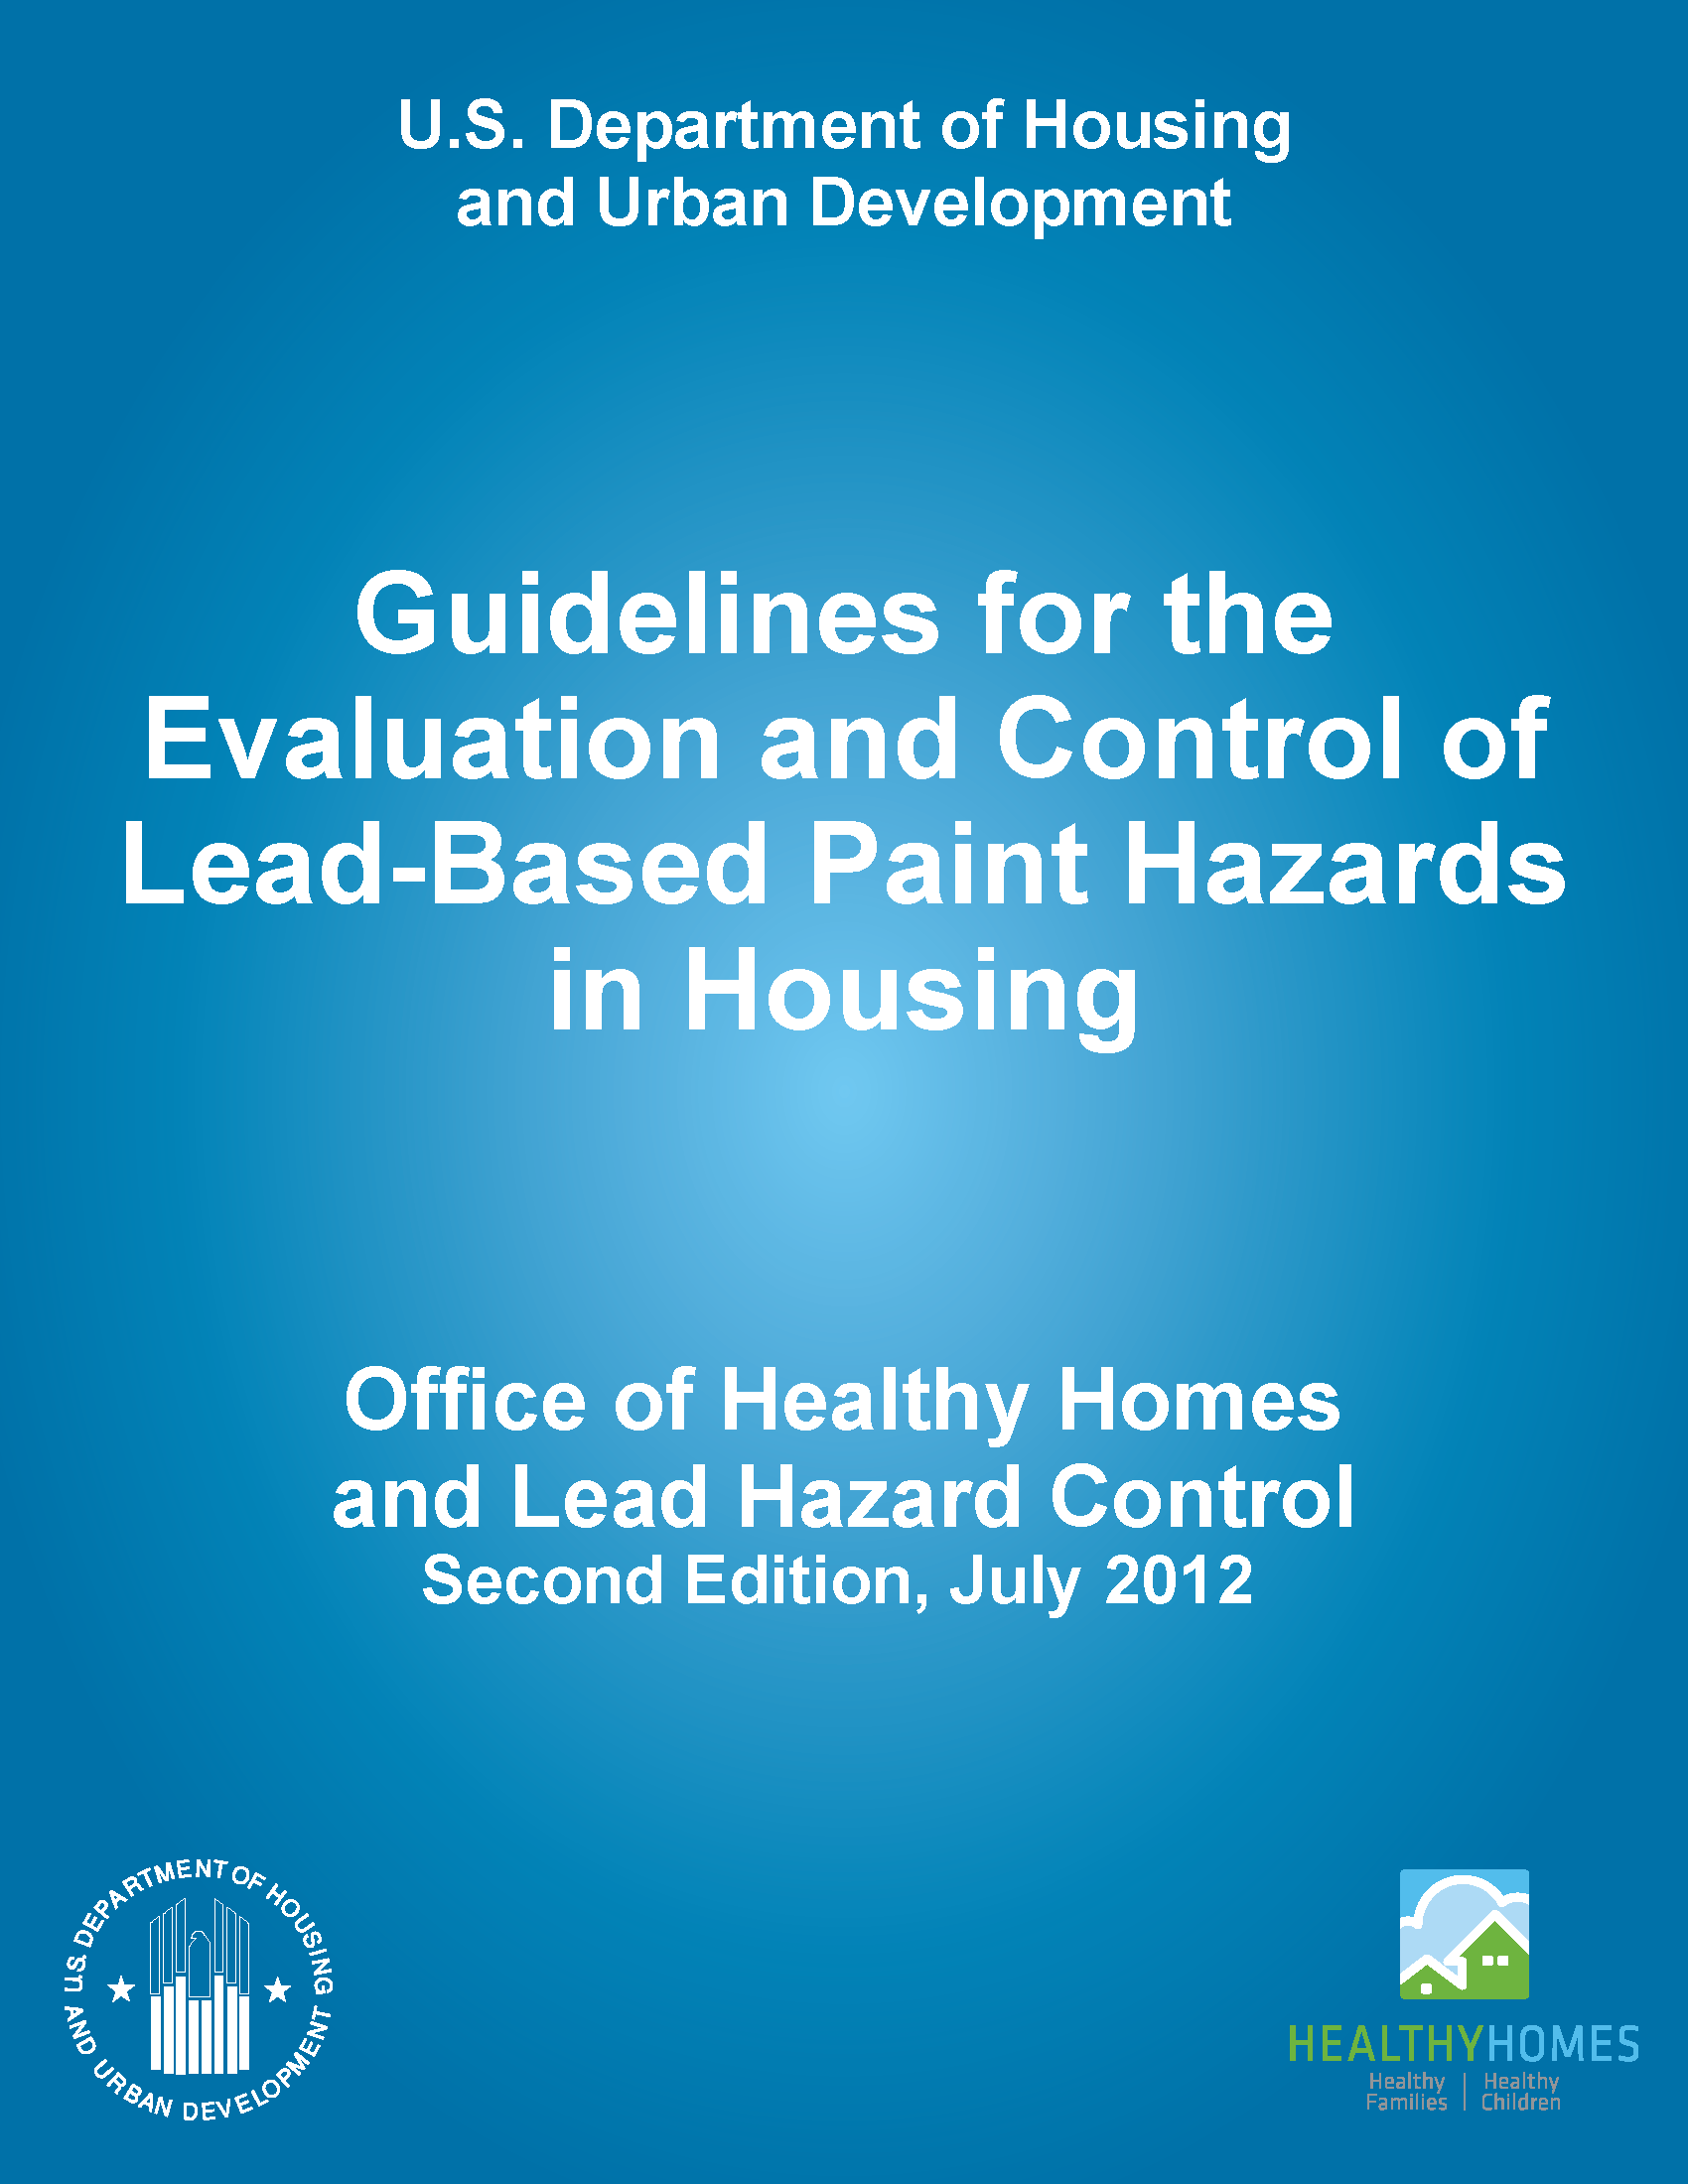 HUD - Guidelines for the Evaluation and Control of Lead Based Paint Hazards in Housing: Second Edition